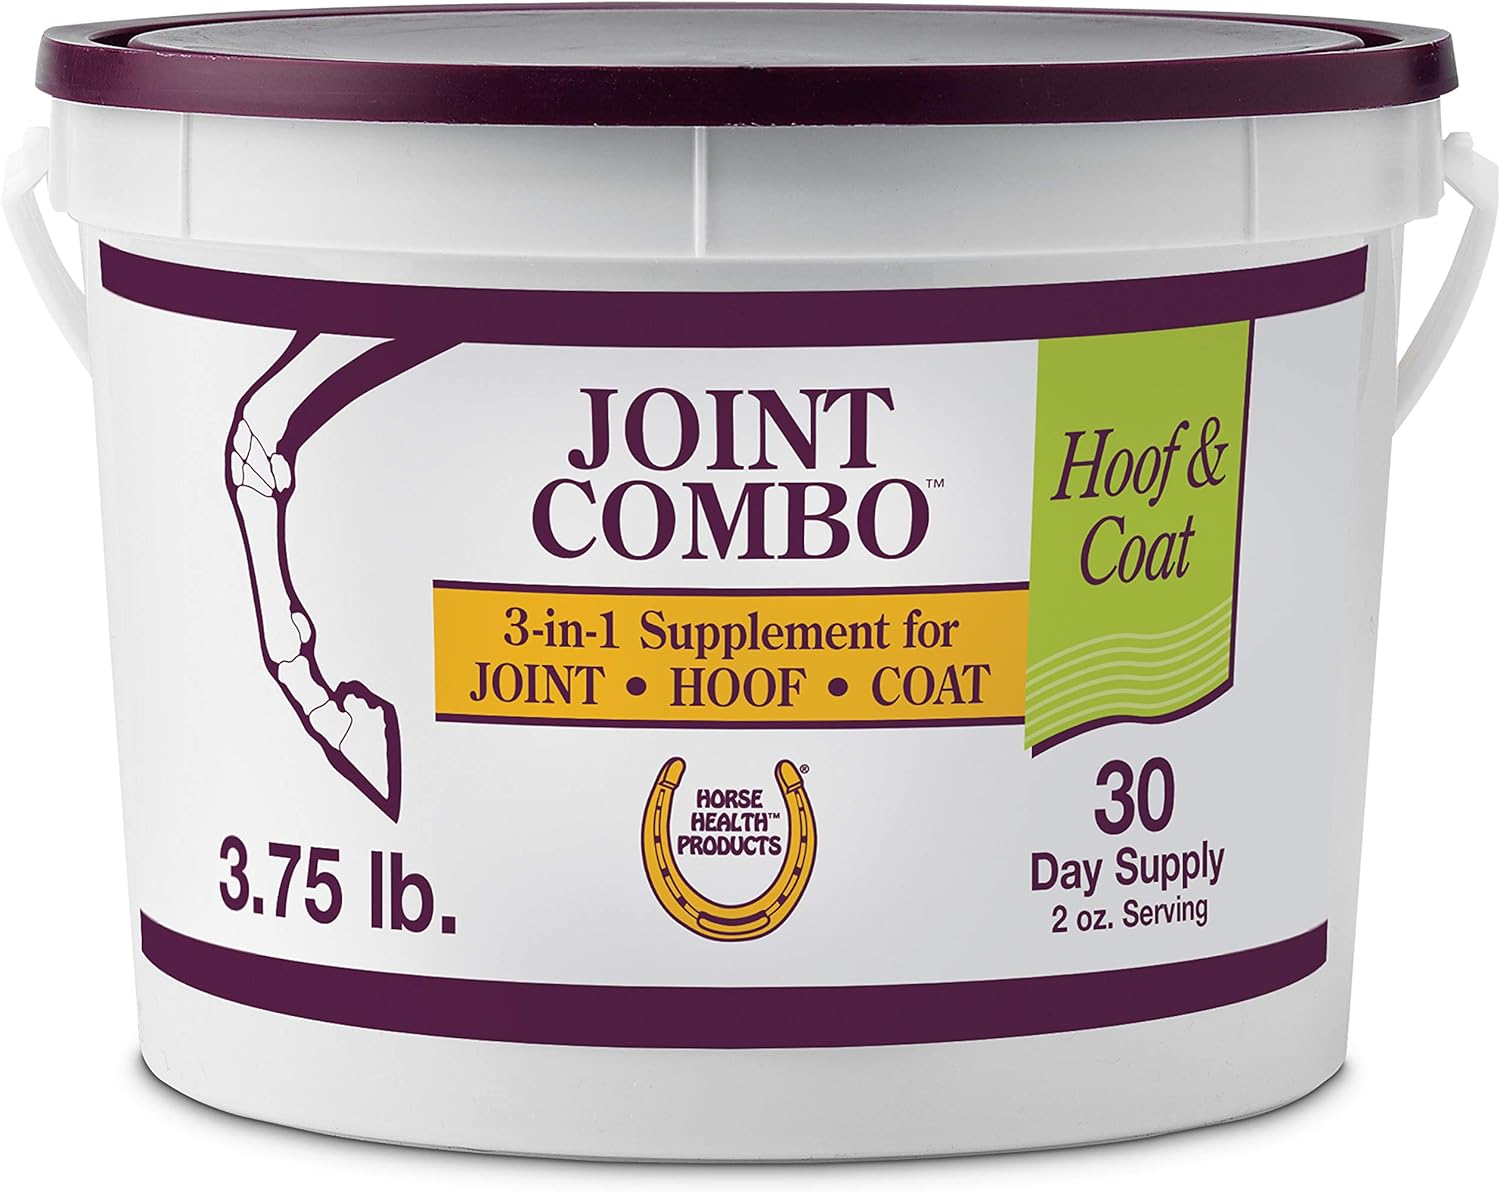 Horse Health Joint Combo Hoof & Coat, Convenient 3-in-1 horse joint supplement provides complete